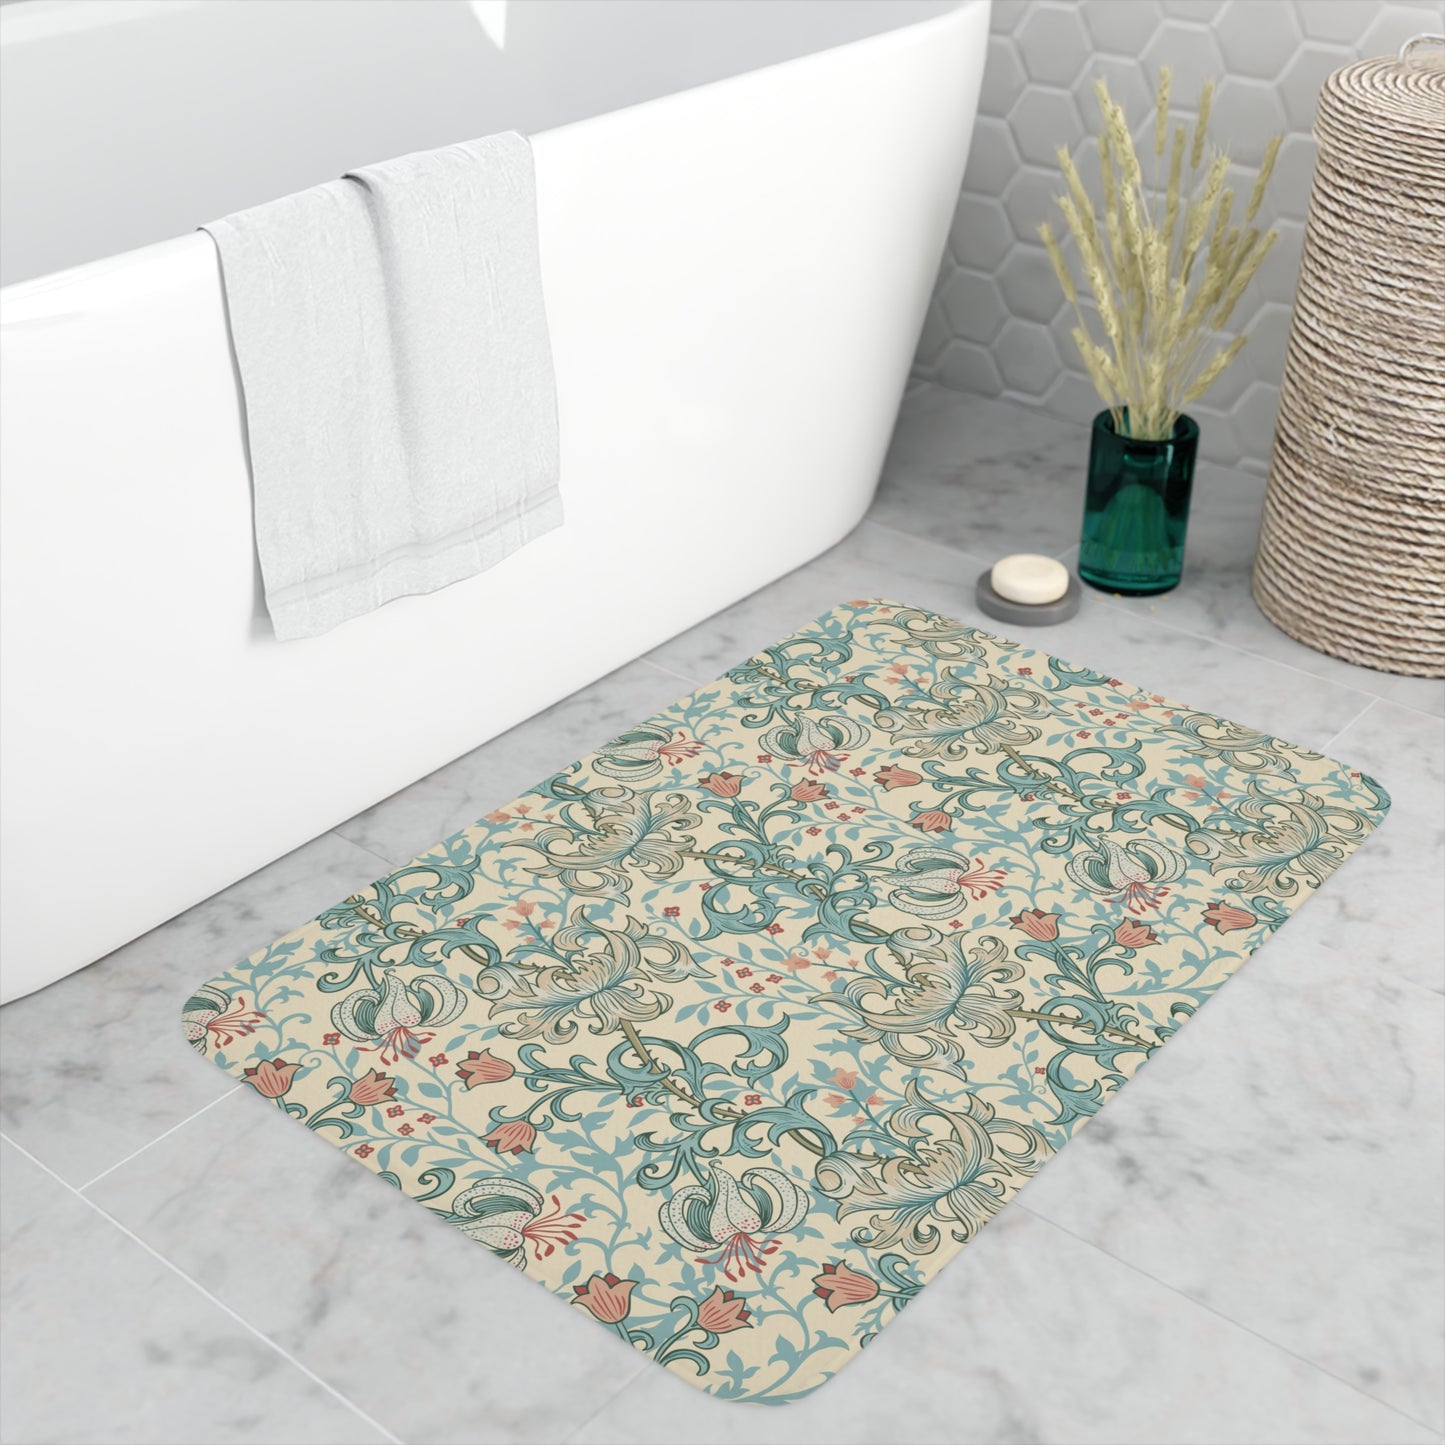 william-morris-co-memory-foam-bath-mat-golden-lily-collection-mineral-4